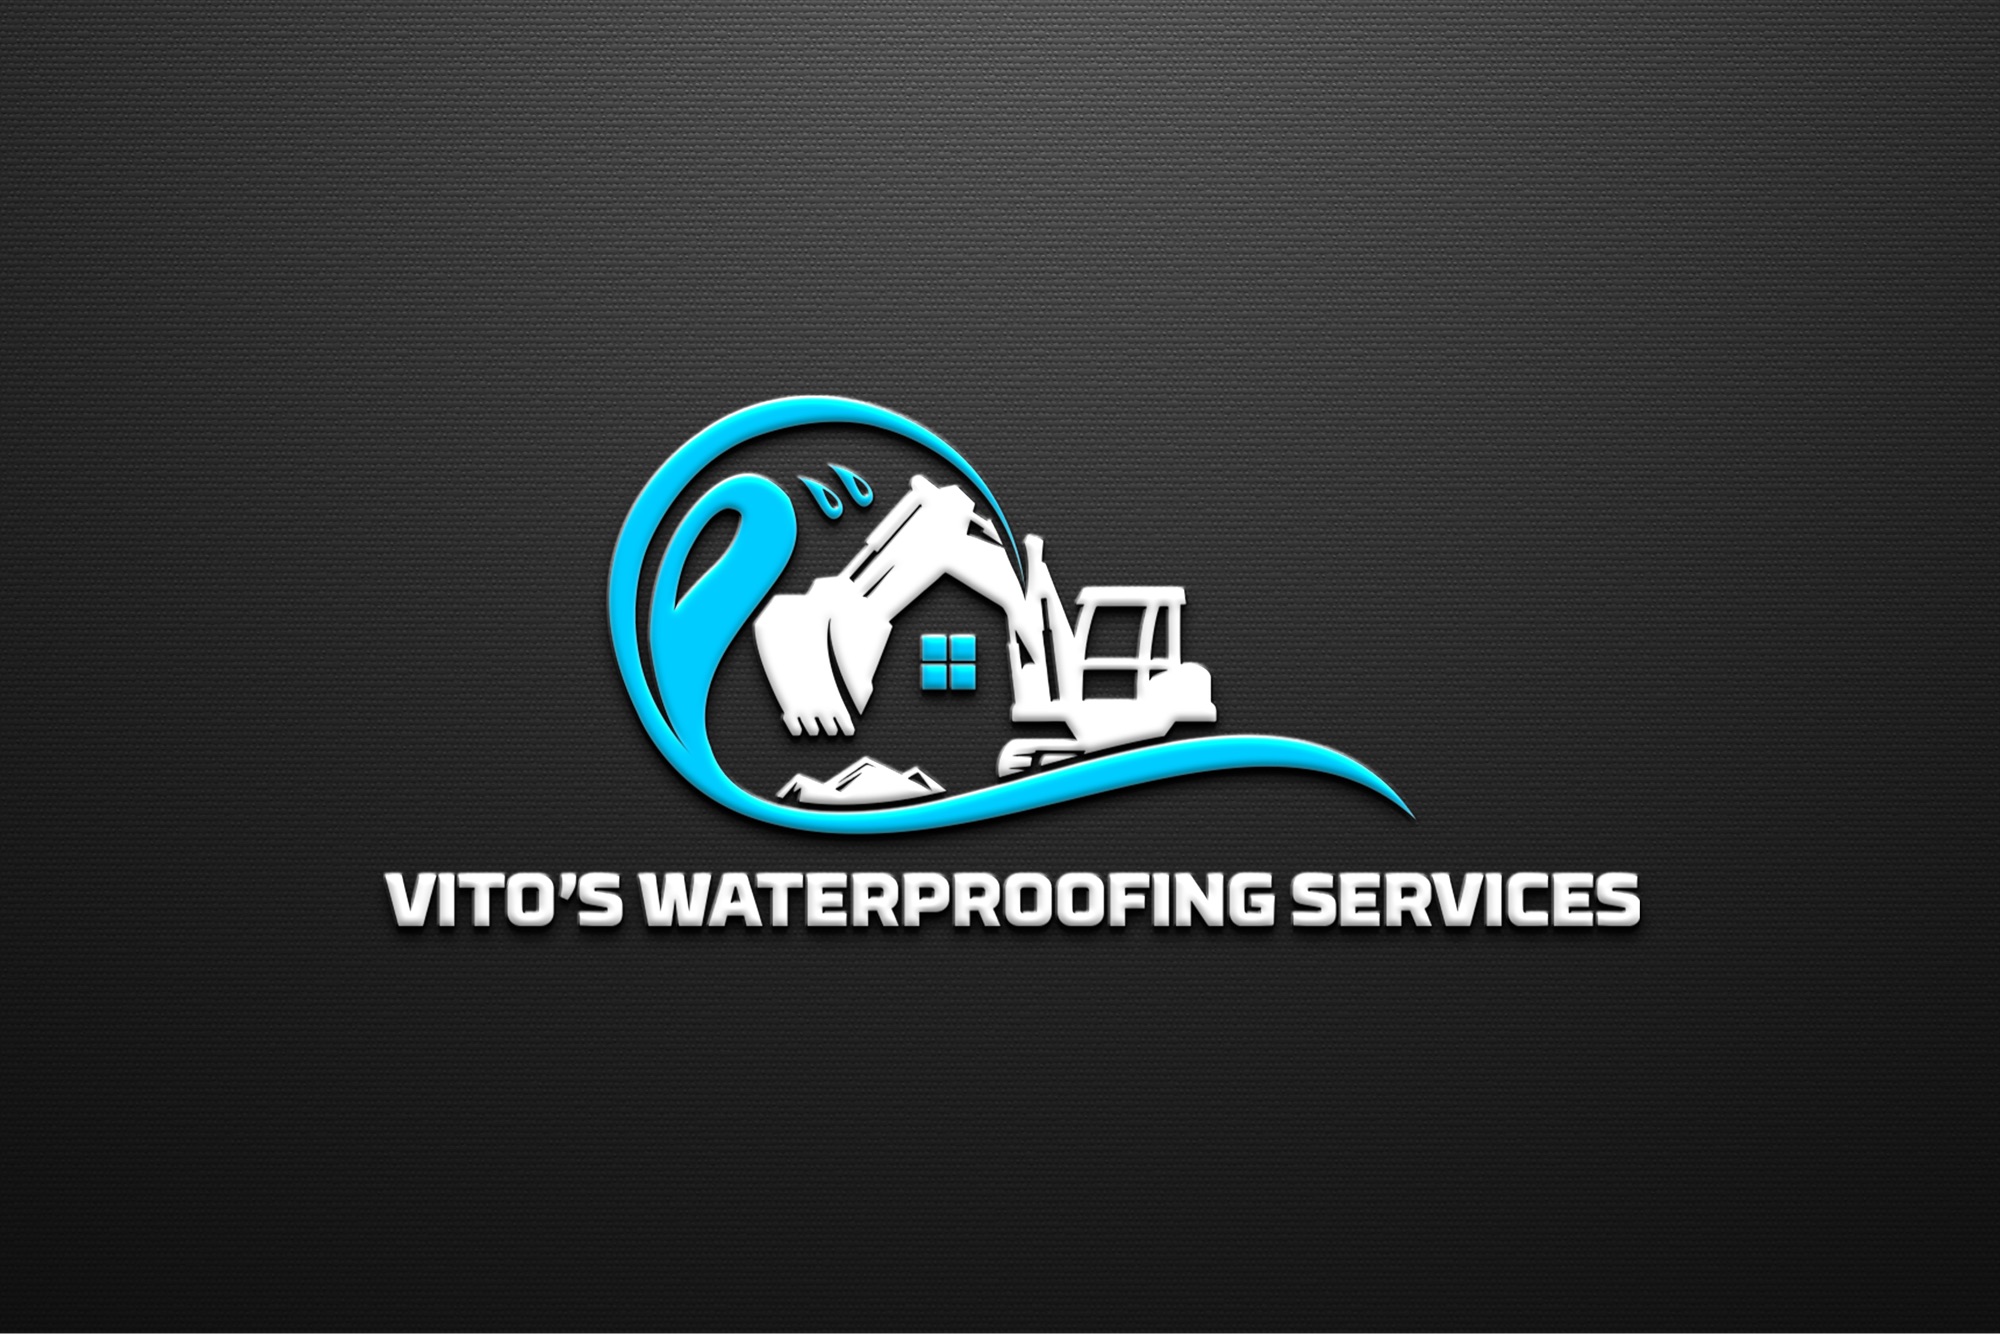 Vito's Waterproofing Services Logo